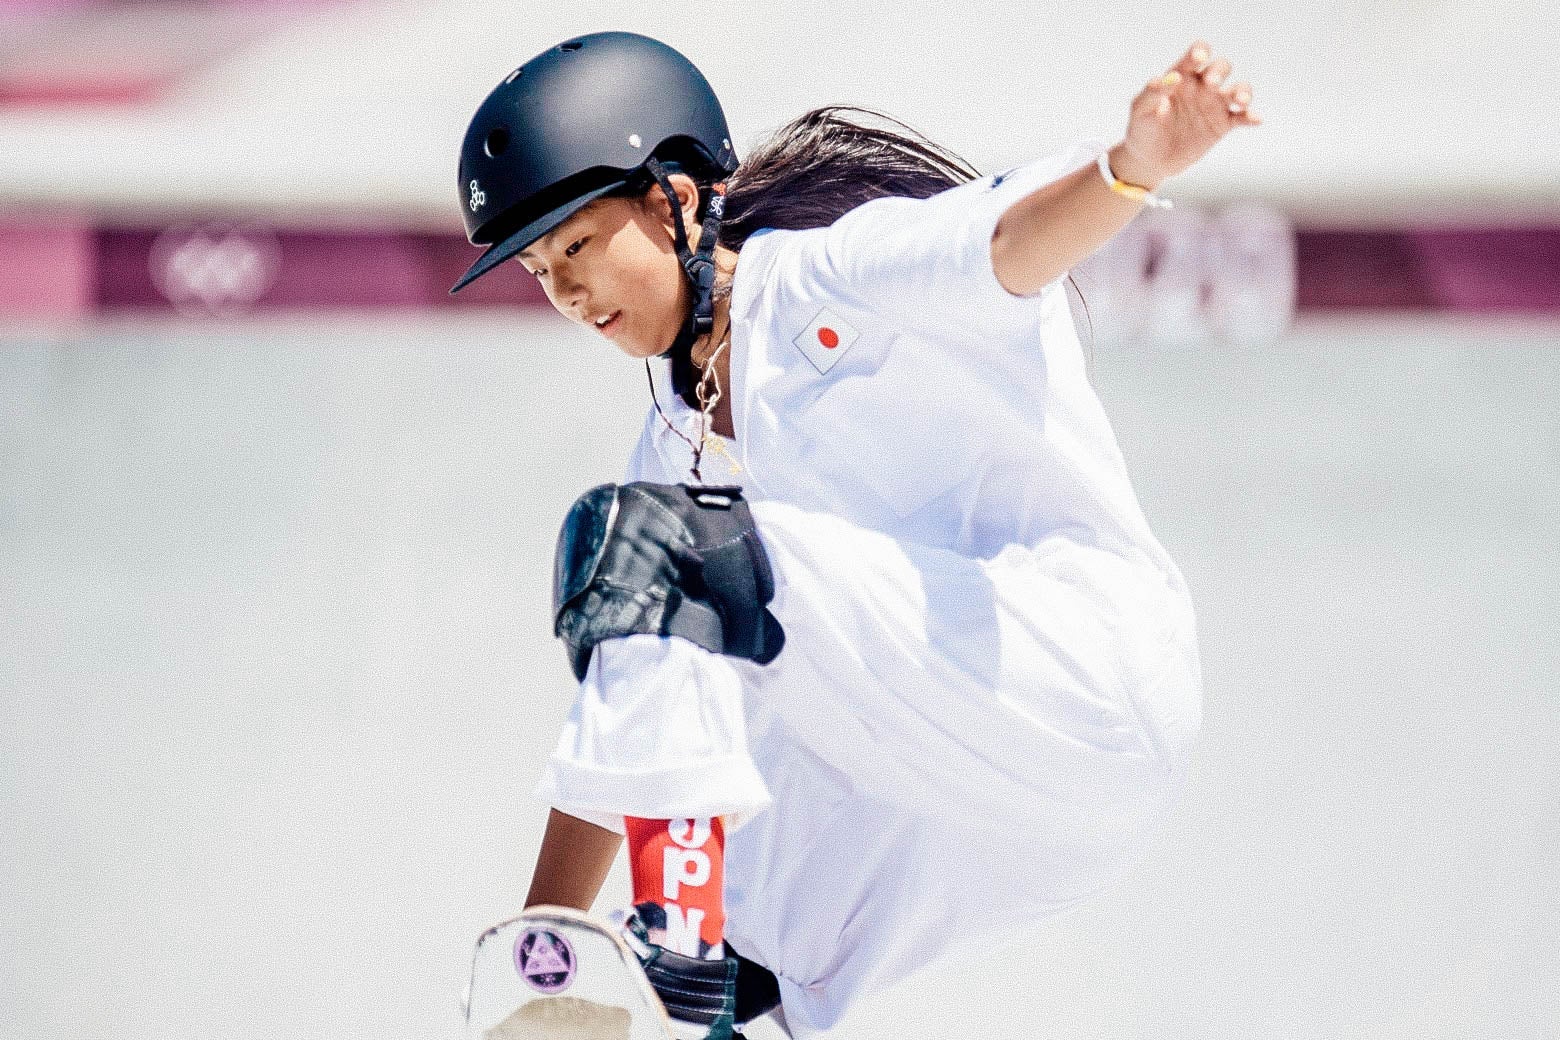 Hiraki on her skateboard ascending the park ramp, looking at her feet, left arm outstretched, in knee pads and helmet